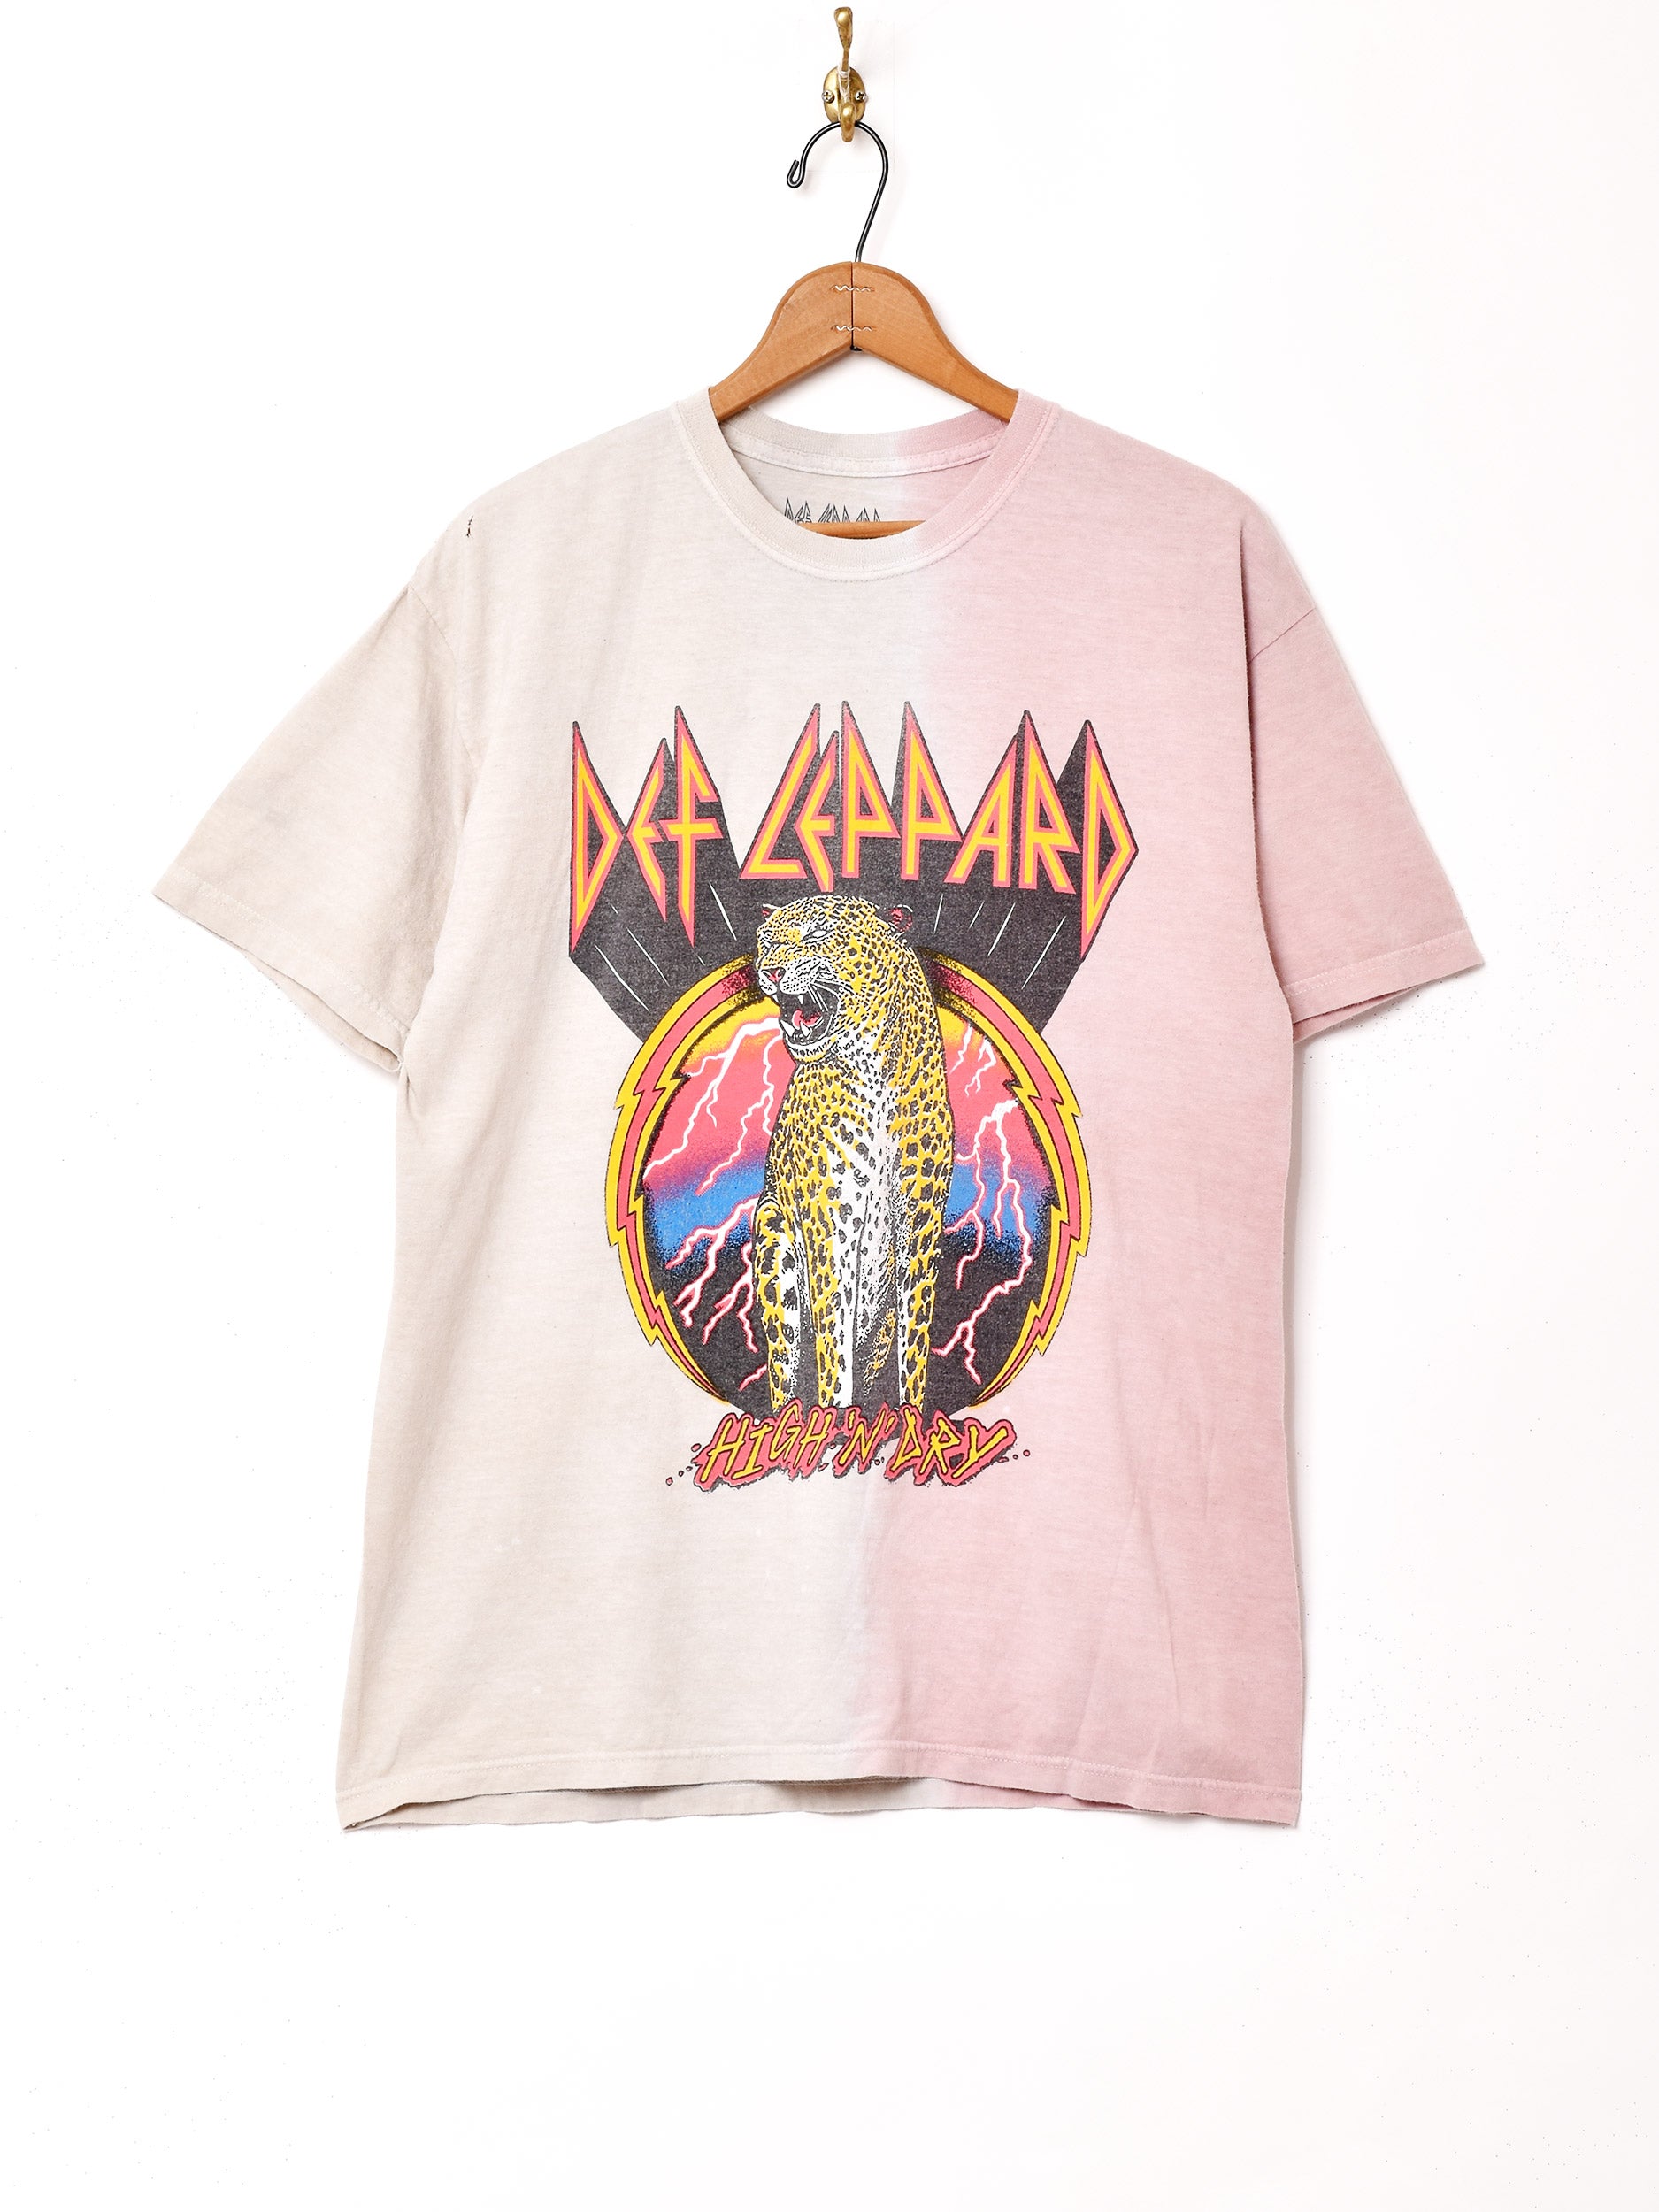 DEF LEPPARD バンドTシャツ – 古着屋Top of the Hillのネット通販サイト